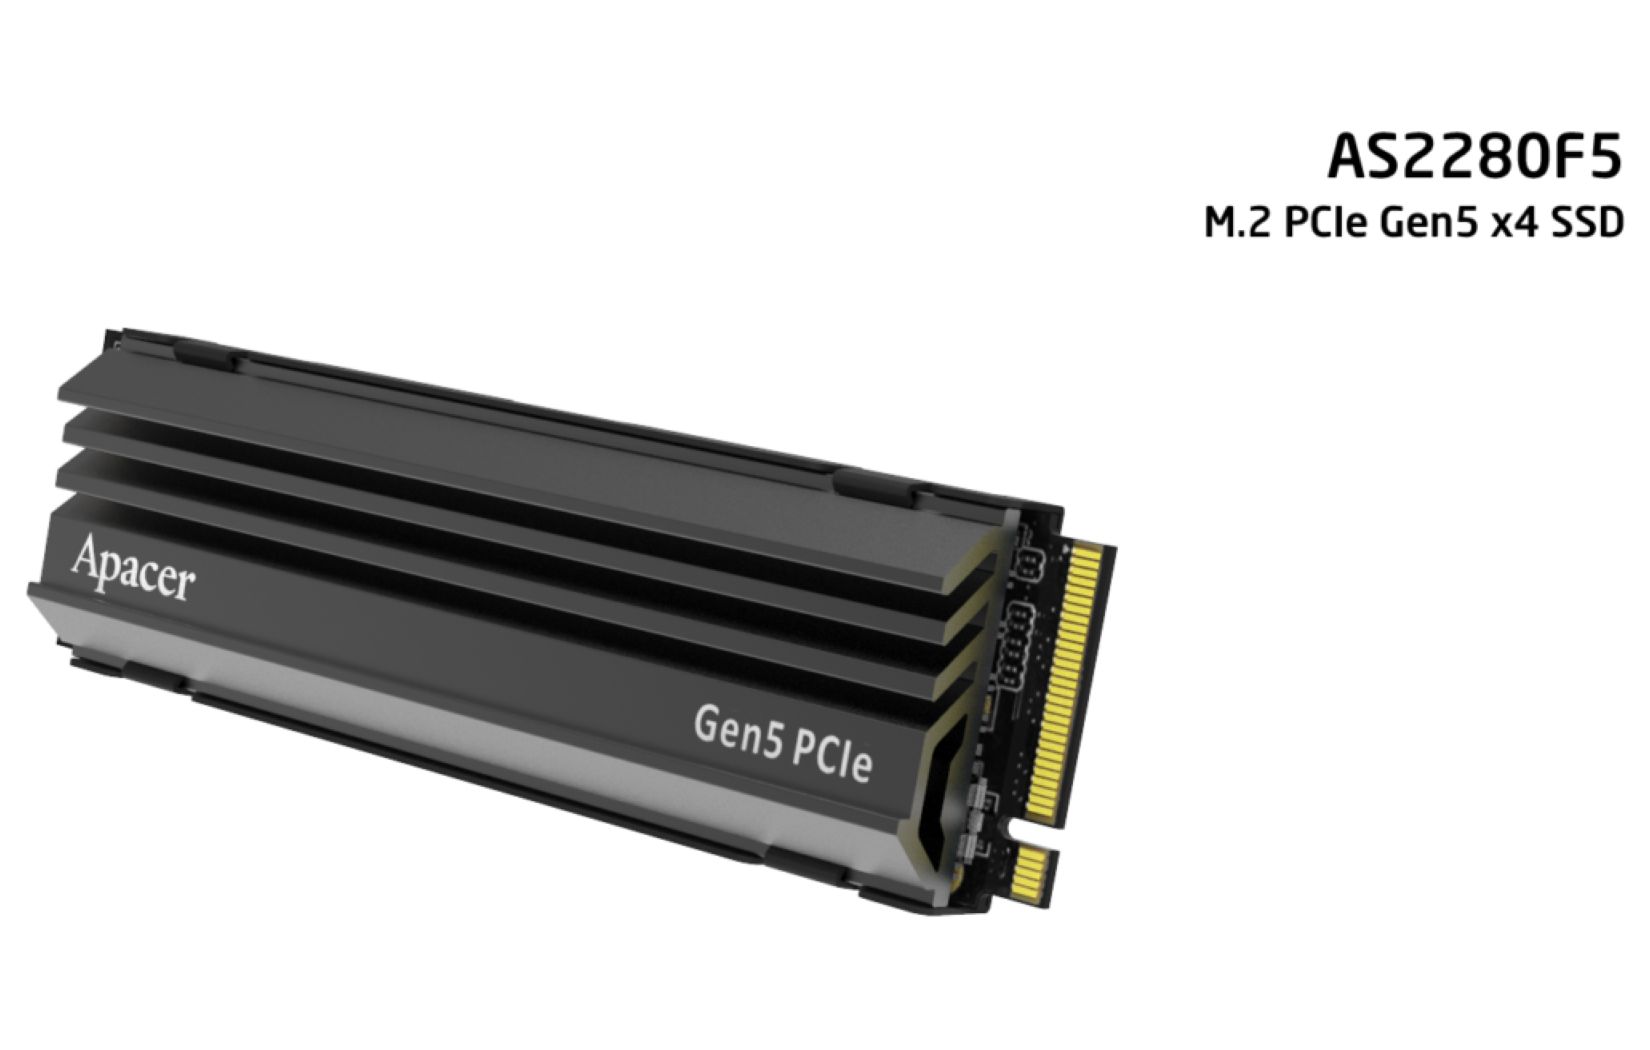 PNY's new NVMe SSDs deliver Gen5 x4 12,000MB/s speeds and dual-fan